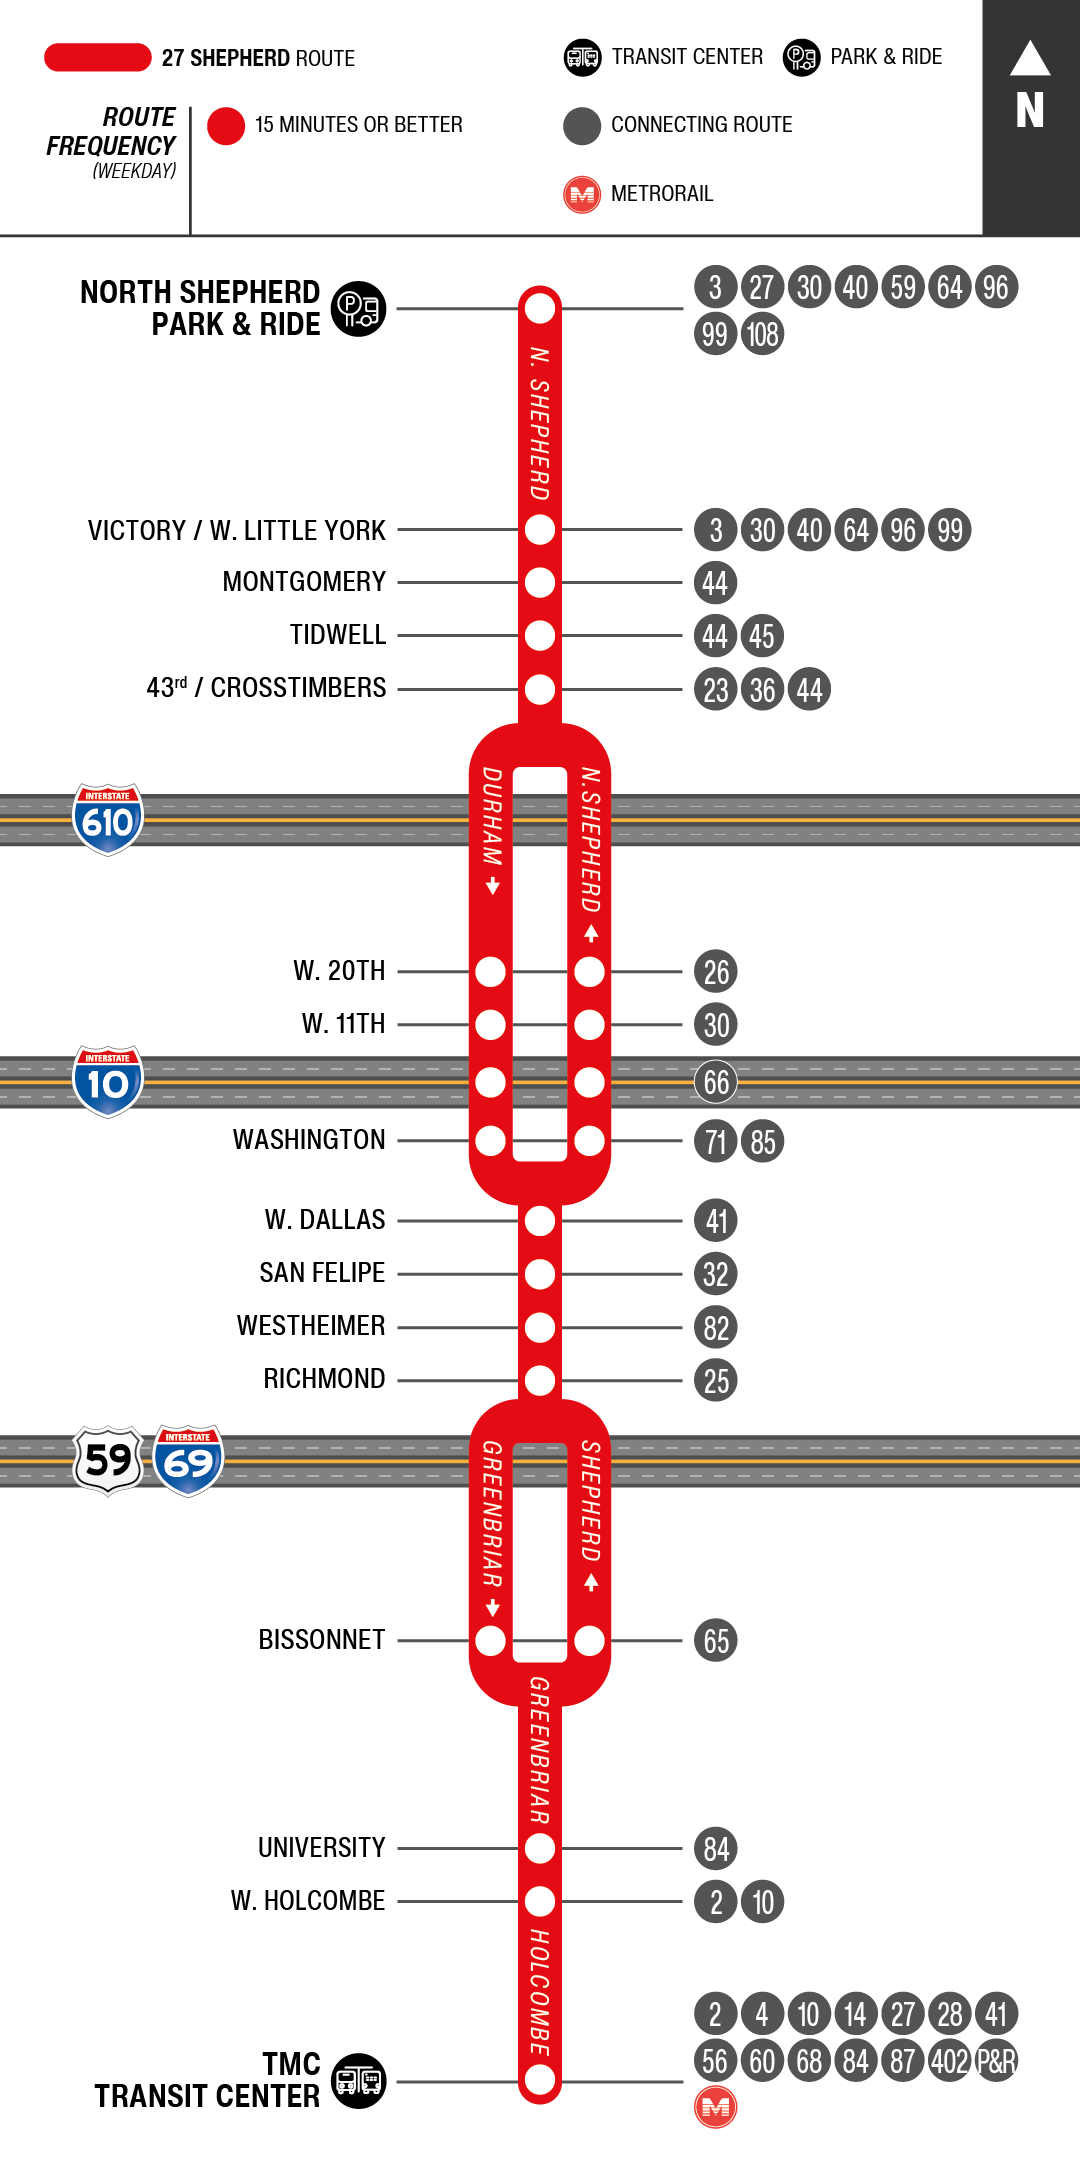 Route map for 27 Shepherd bus